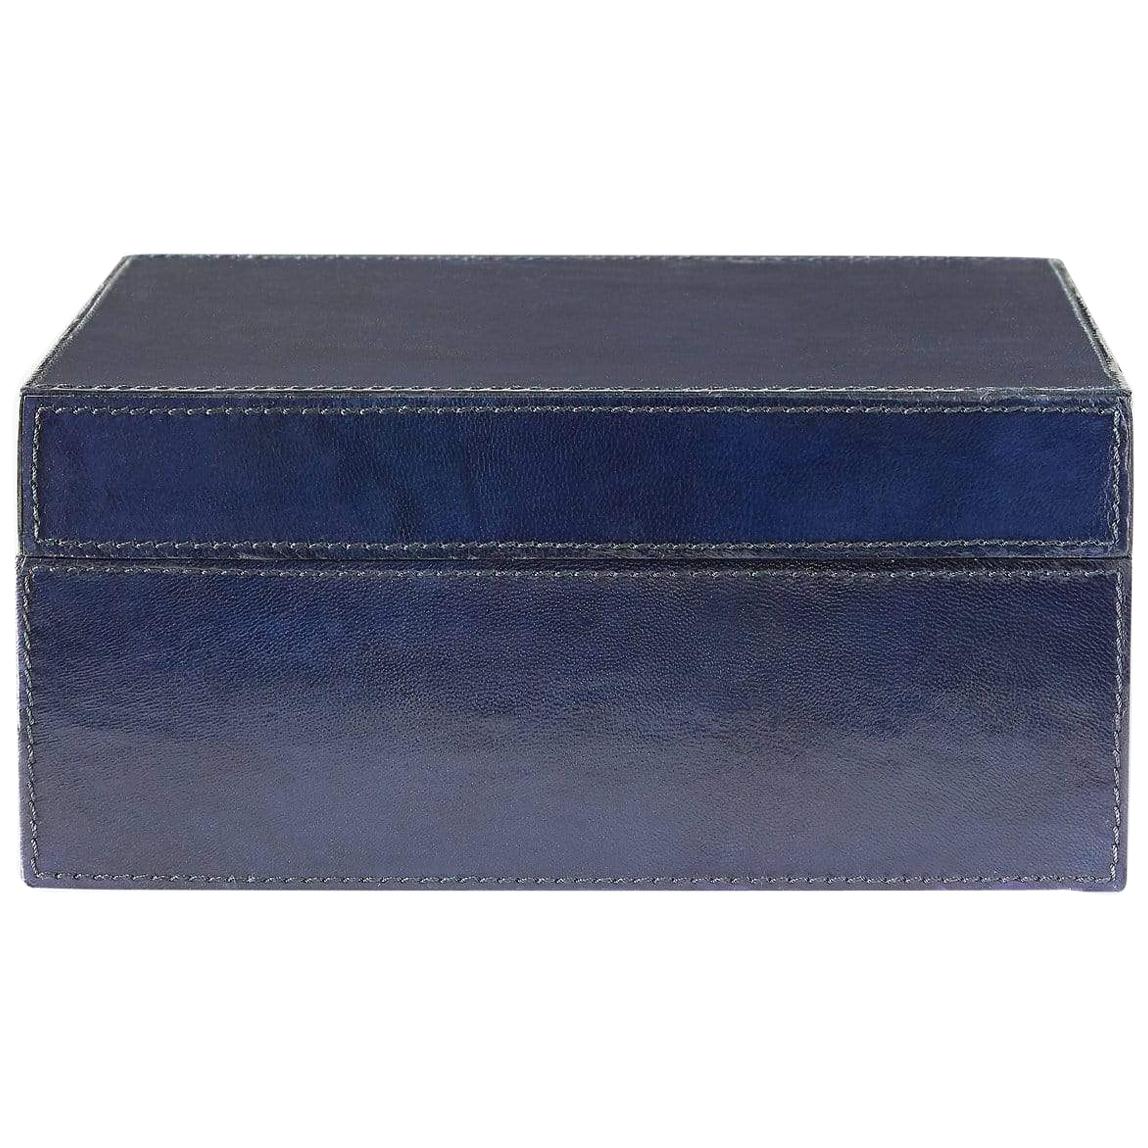 Ben Soleimani Bromes Leather Boxes - Large  For Sale